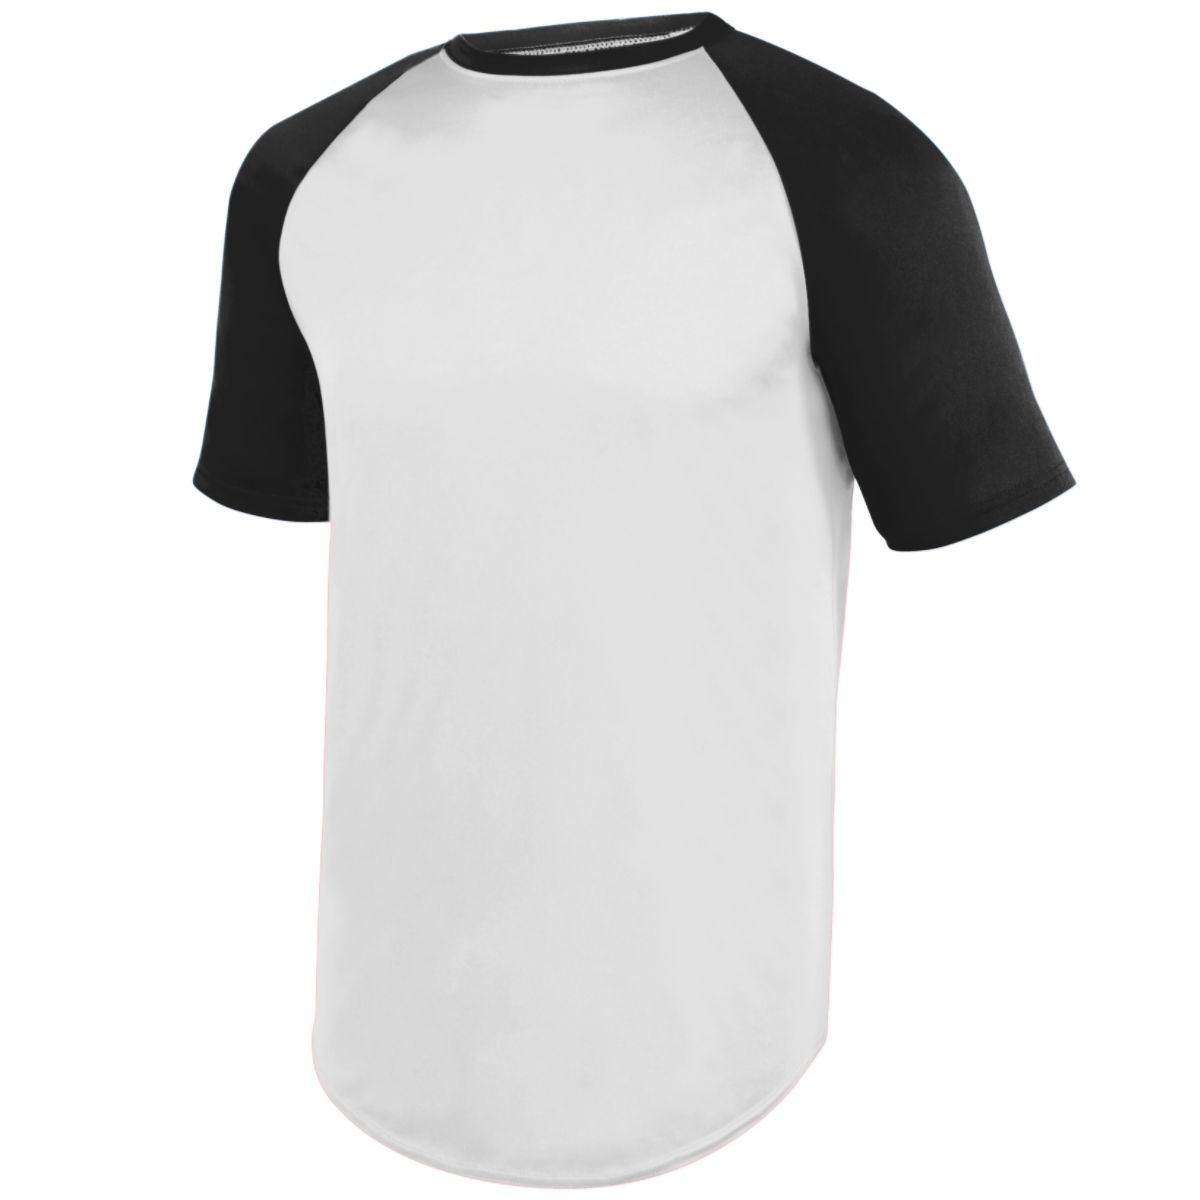 Augusta Sportswear Wicking Short Sleeve Baseball Jersey in White/Black  -Part of the Adult, Adult-Jersey, Augusta-Products, Baseball, Shirts, All-Sports, All-Sports-1 product lines at KanaleyCreations.com